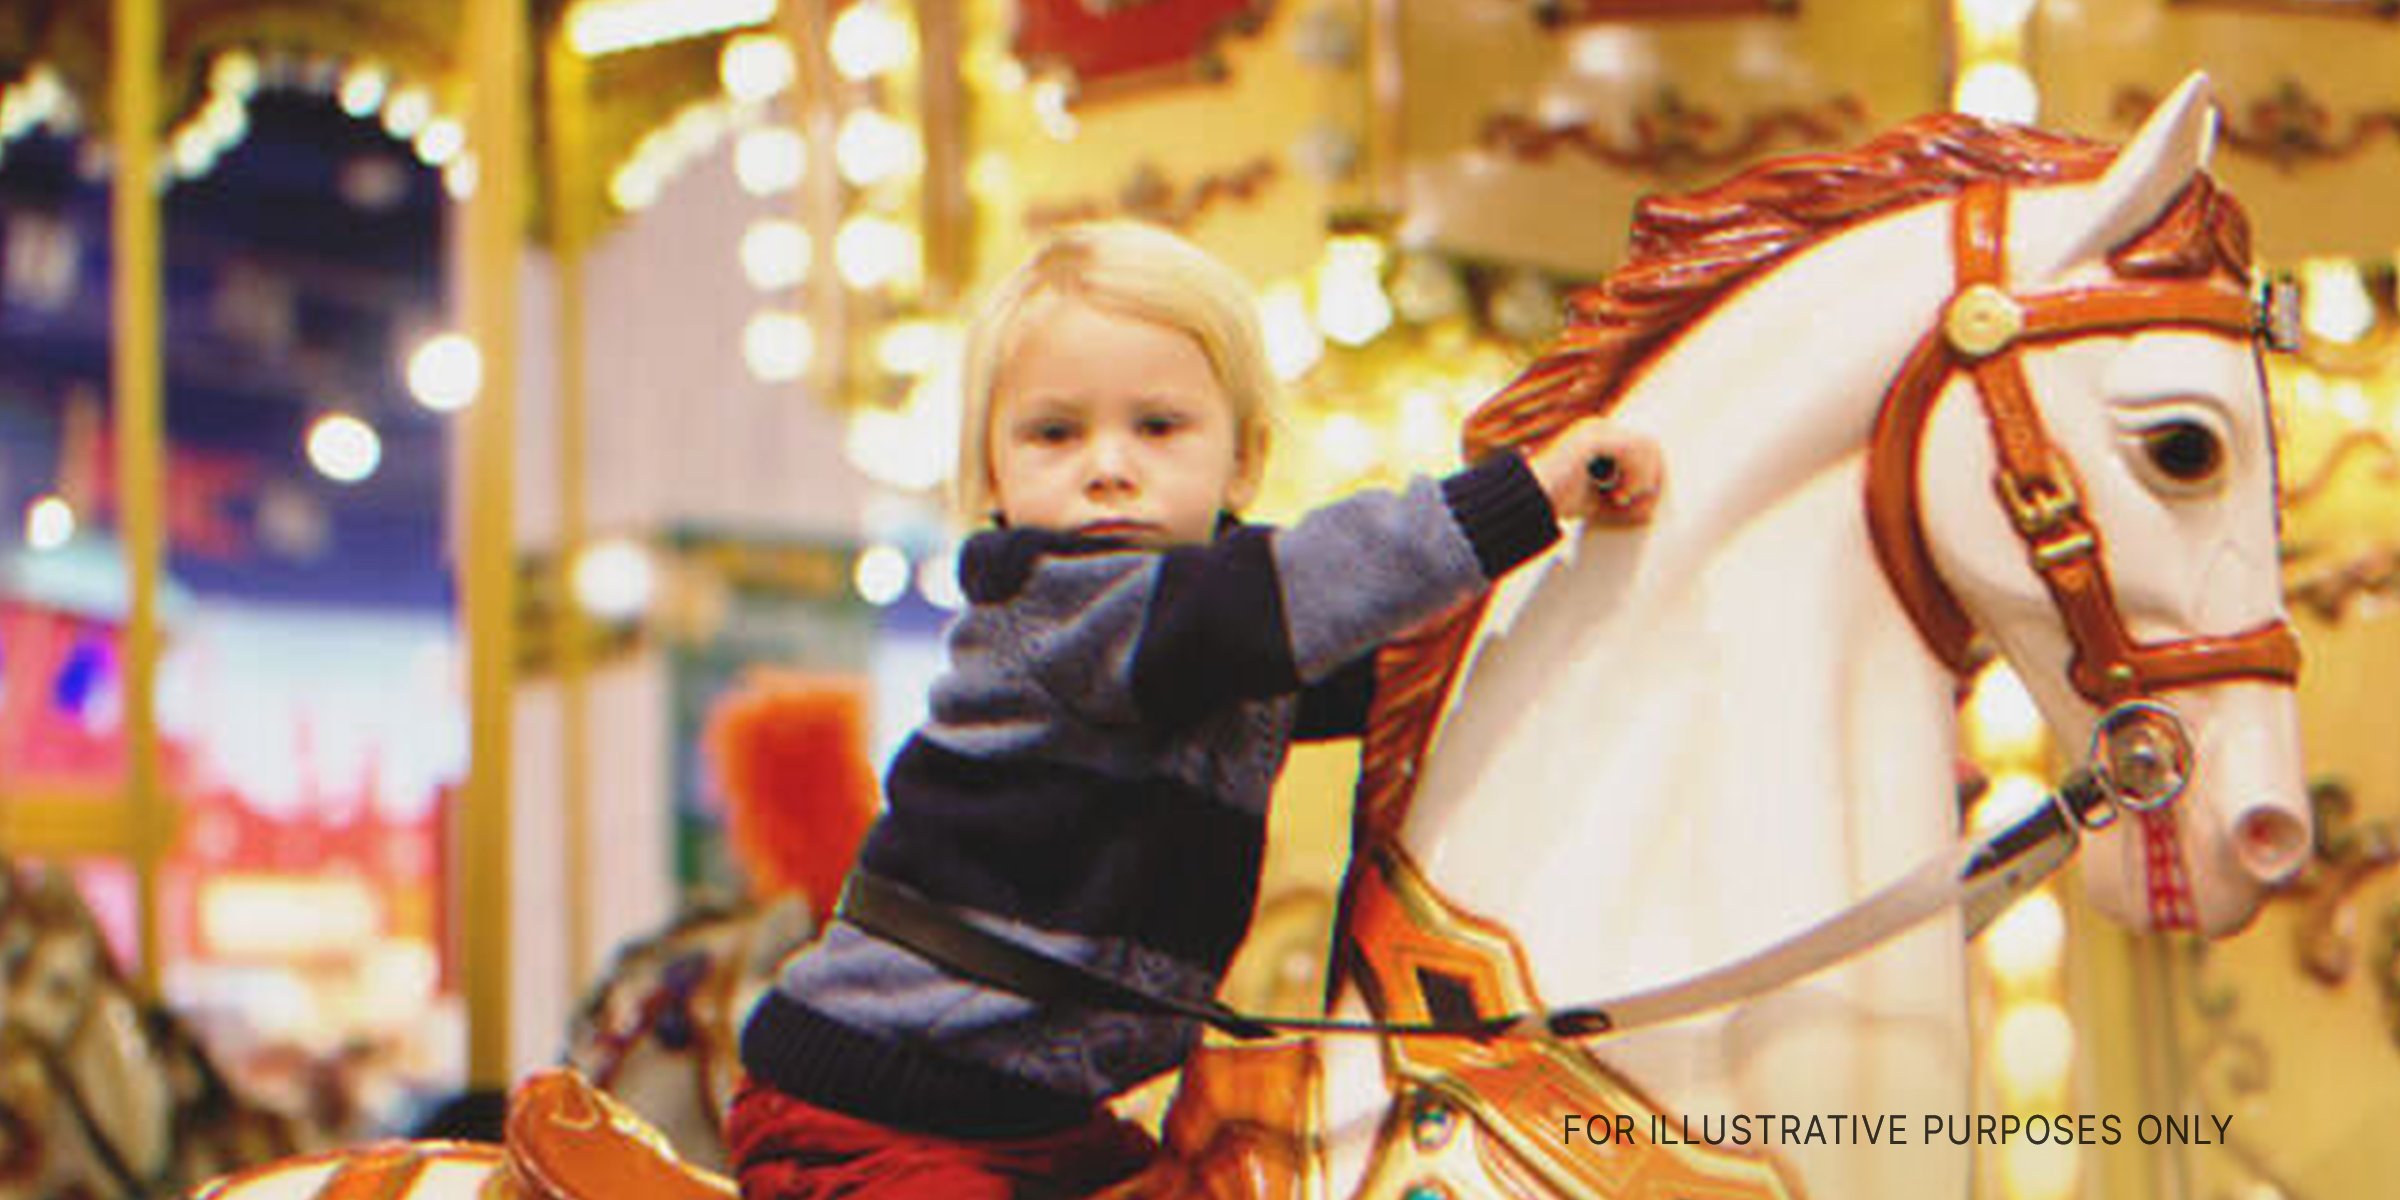 Young boy on carousel. | Source: Getty Images